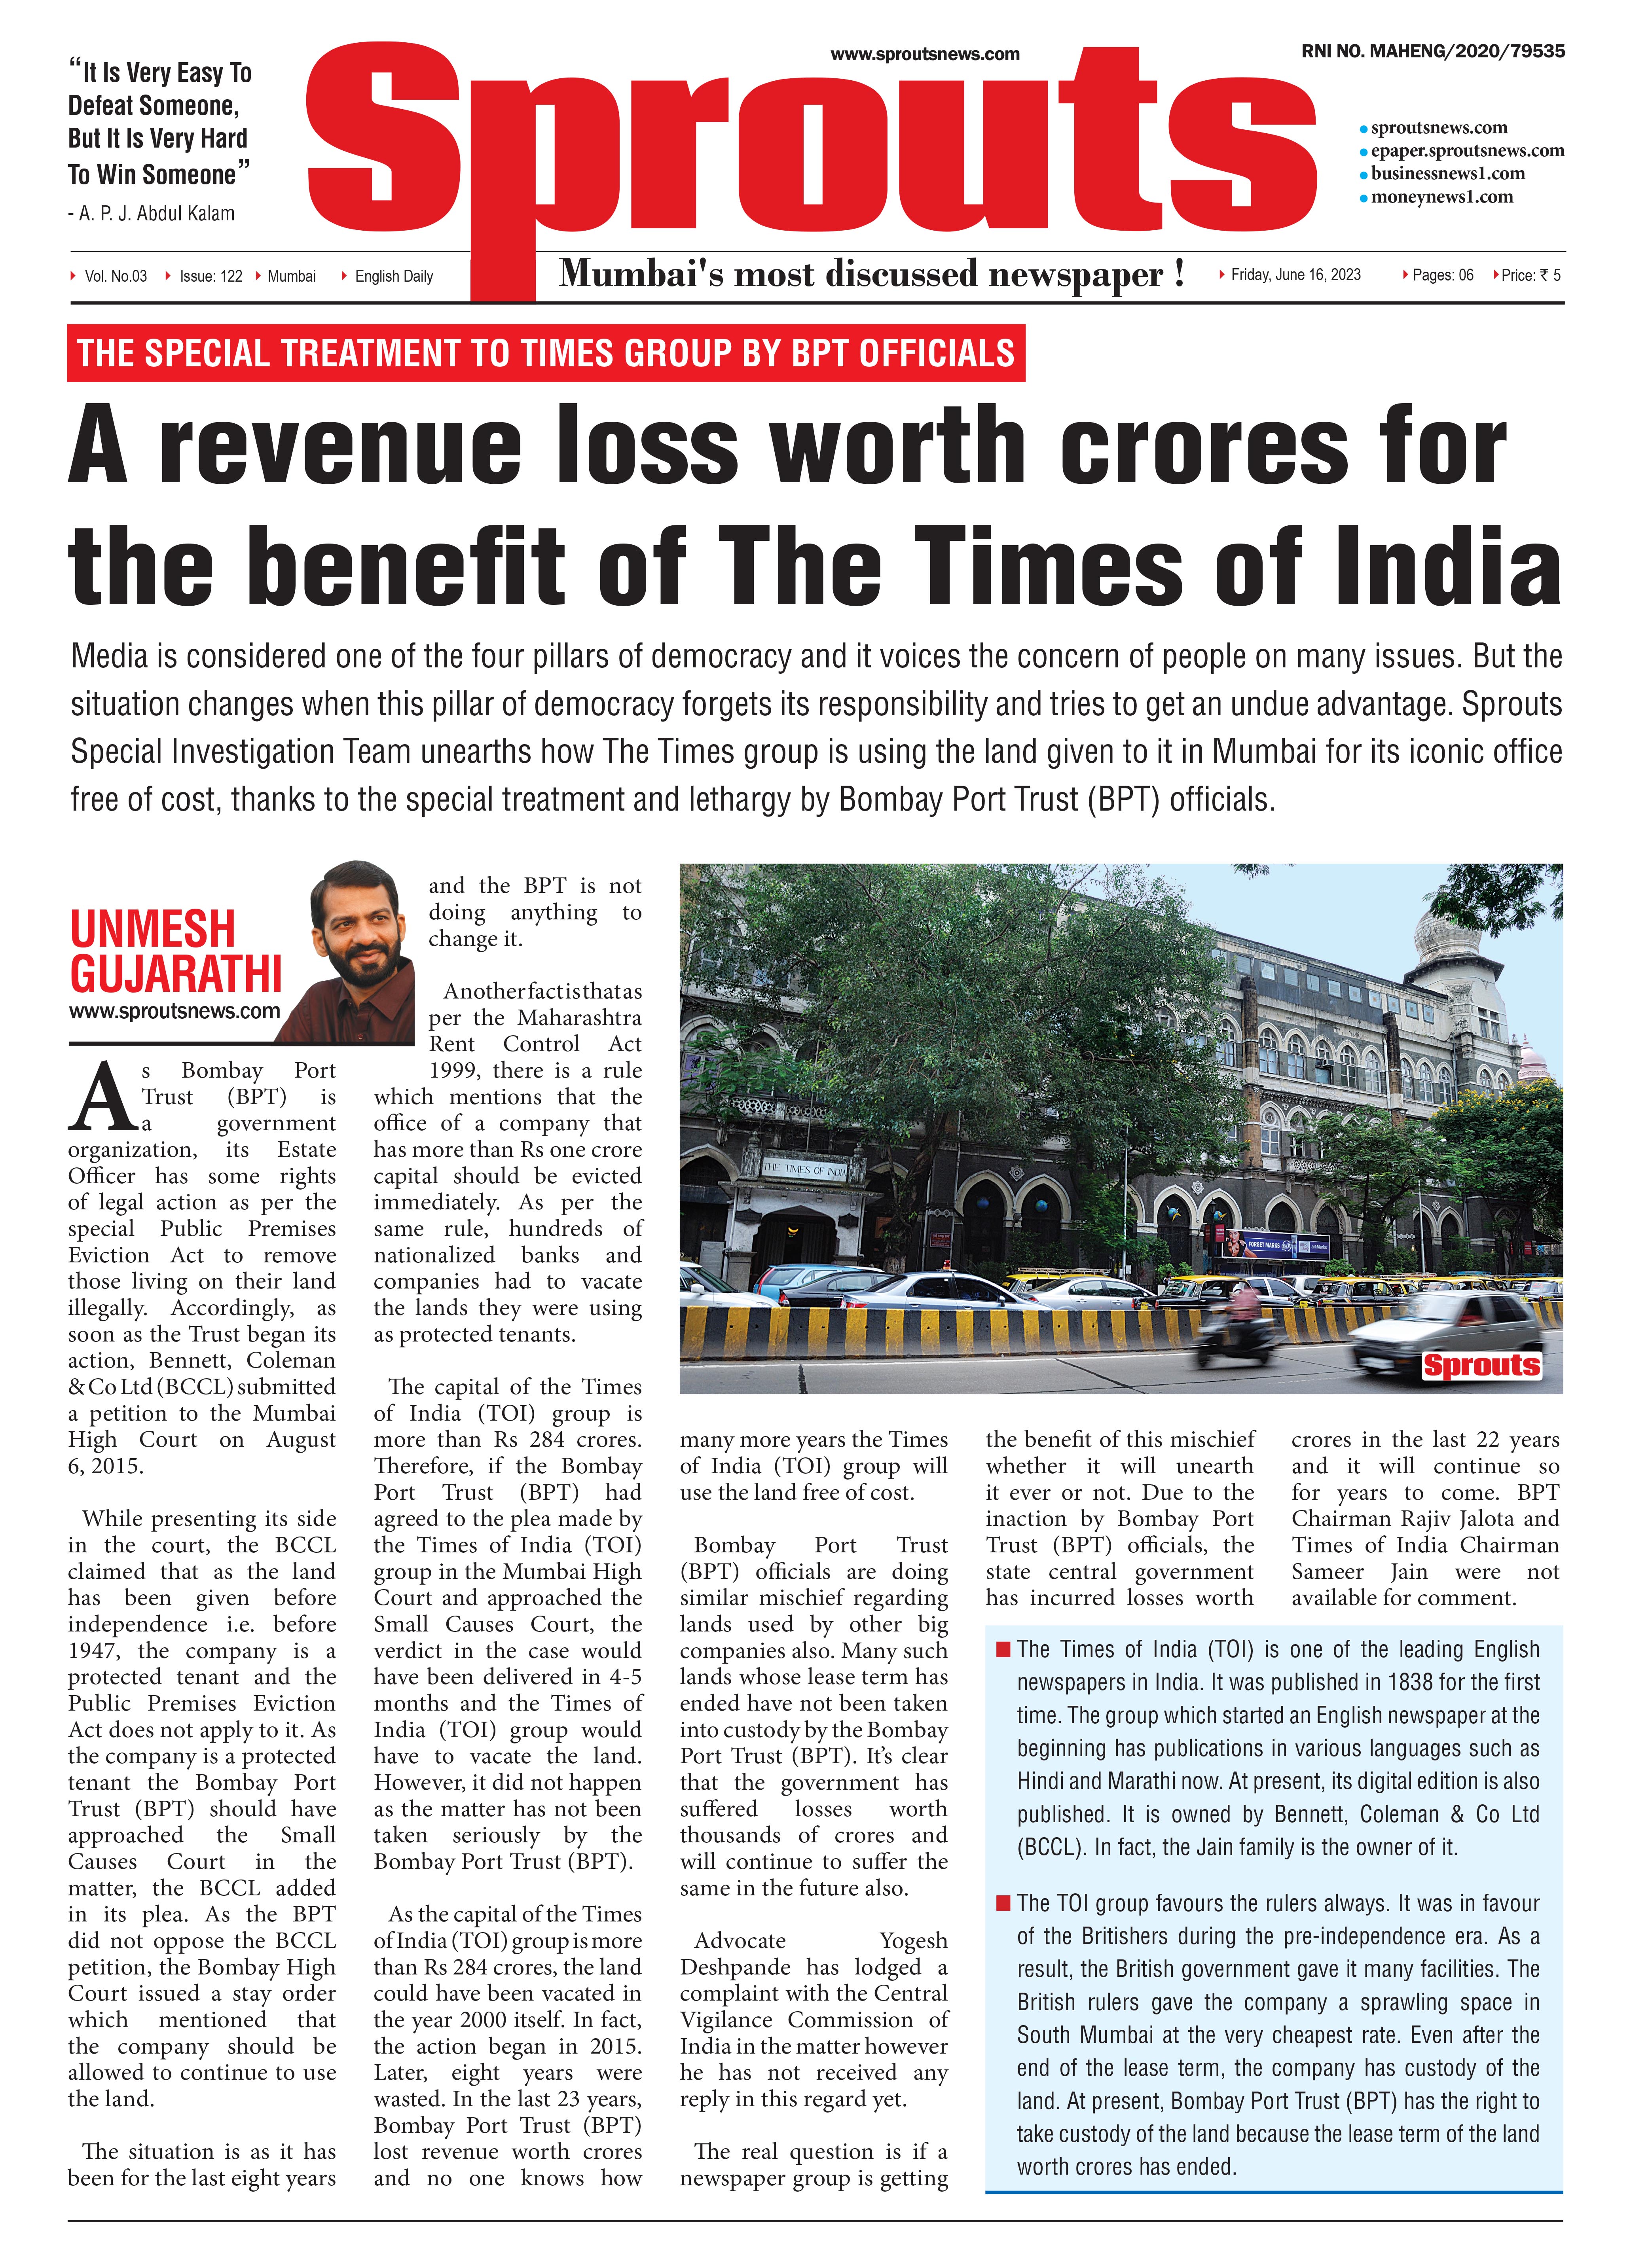 A revenue loss worth crores for the benefit of The Times of India